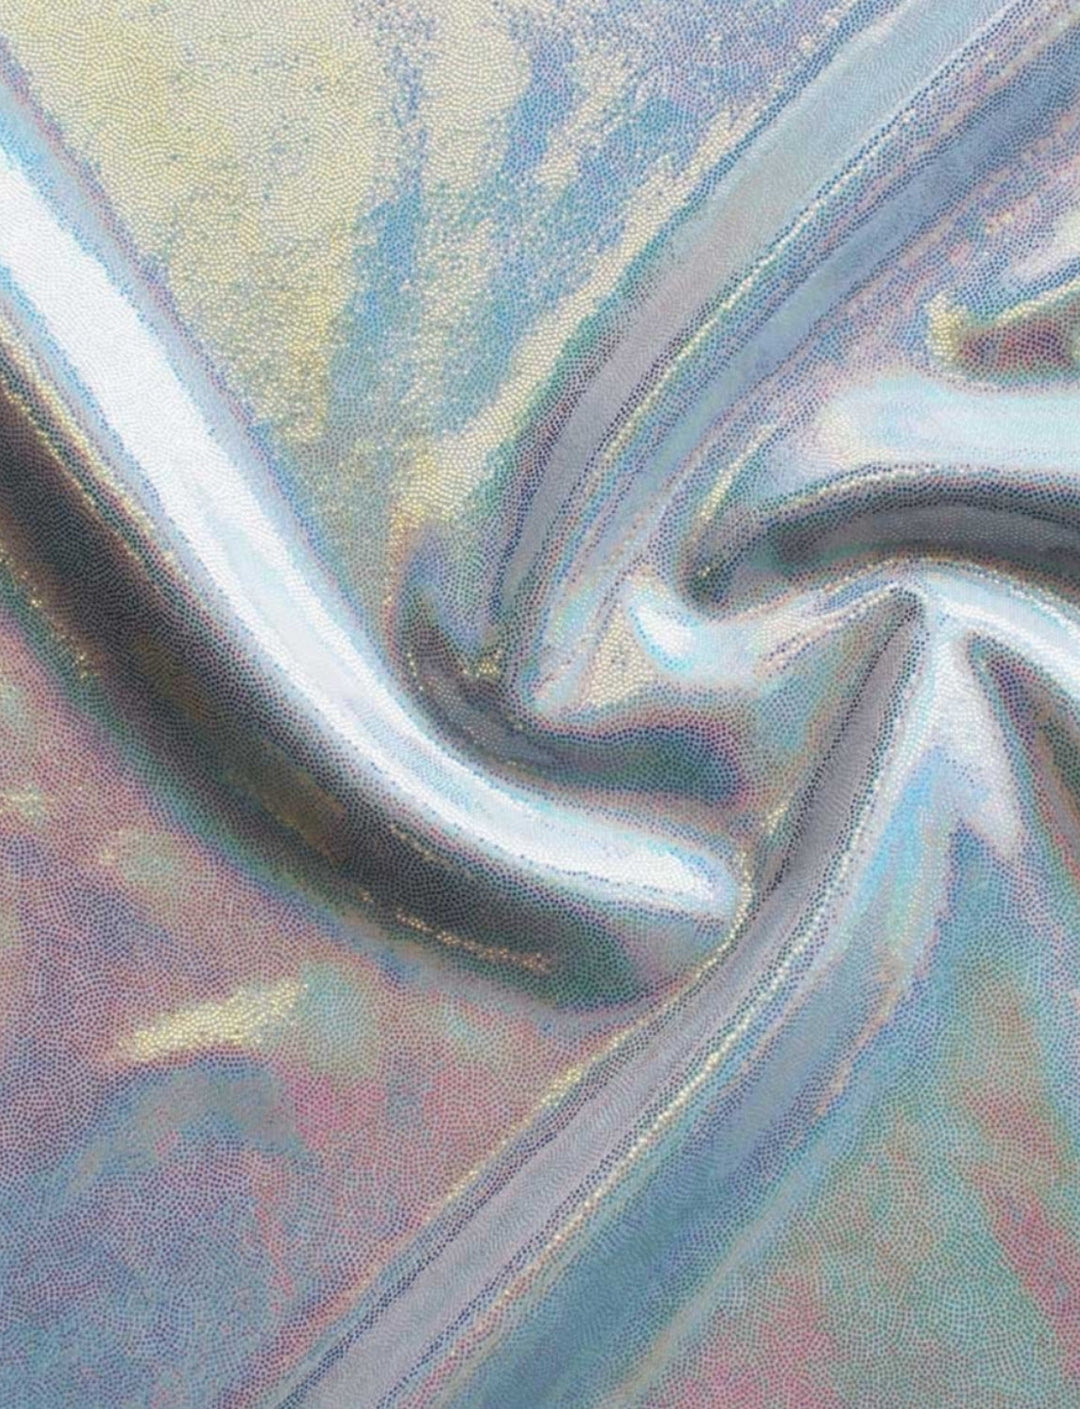 holographic silver fabric swatch